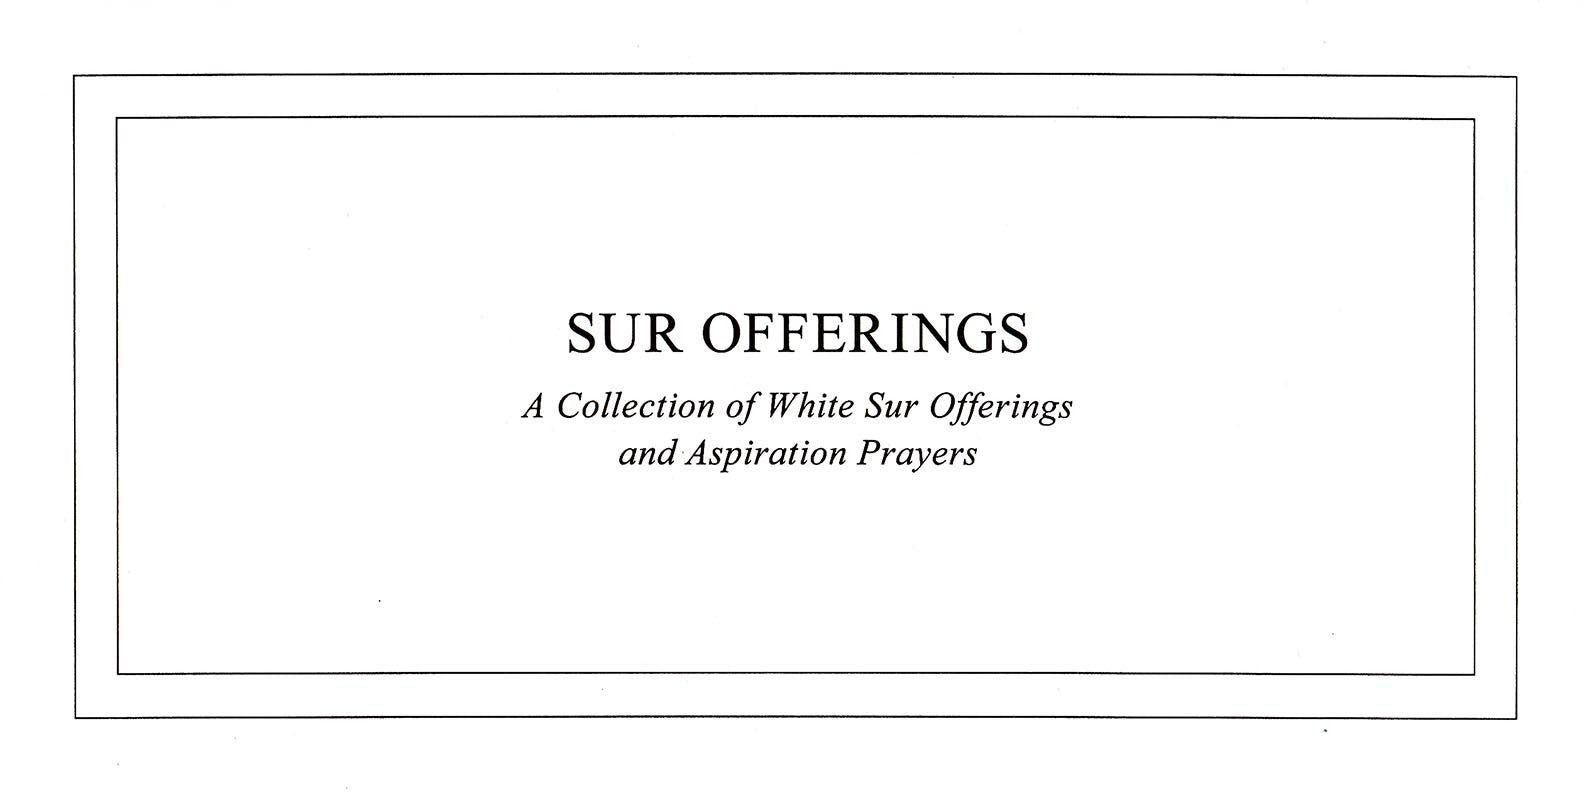 White Sur Offerings